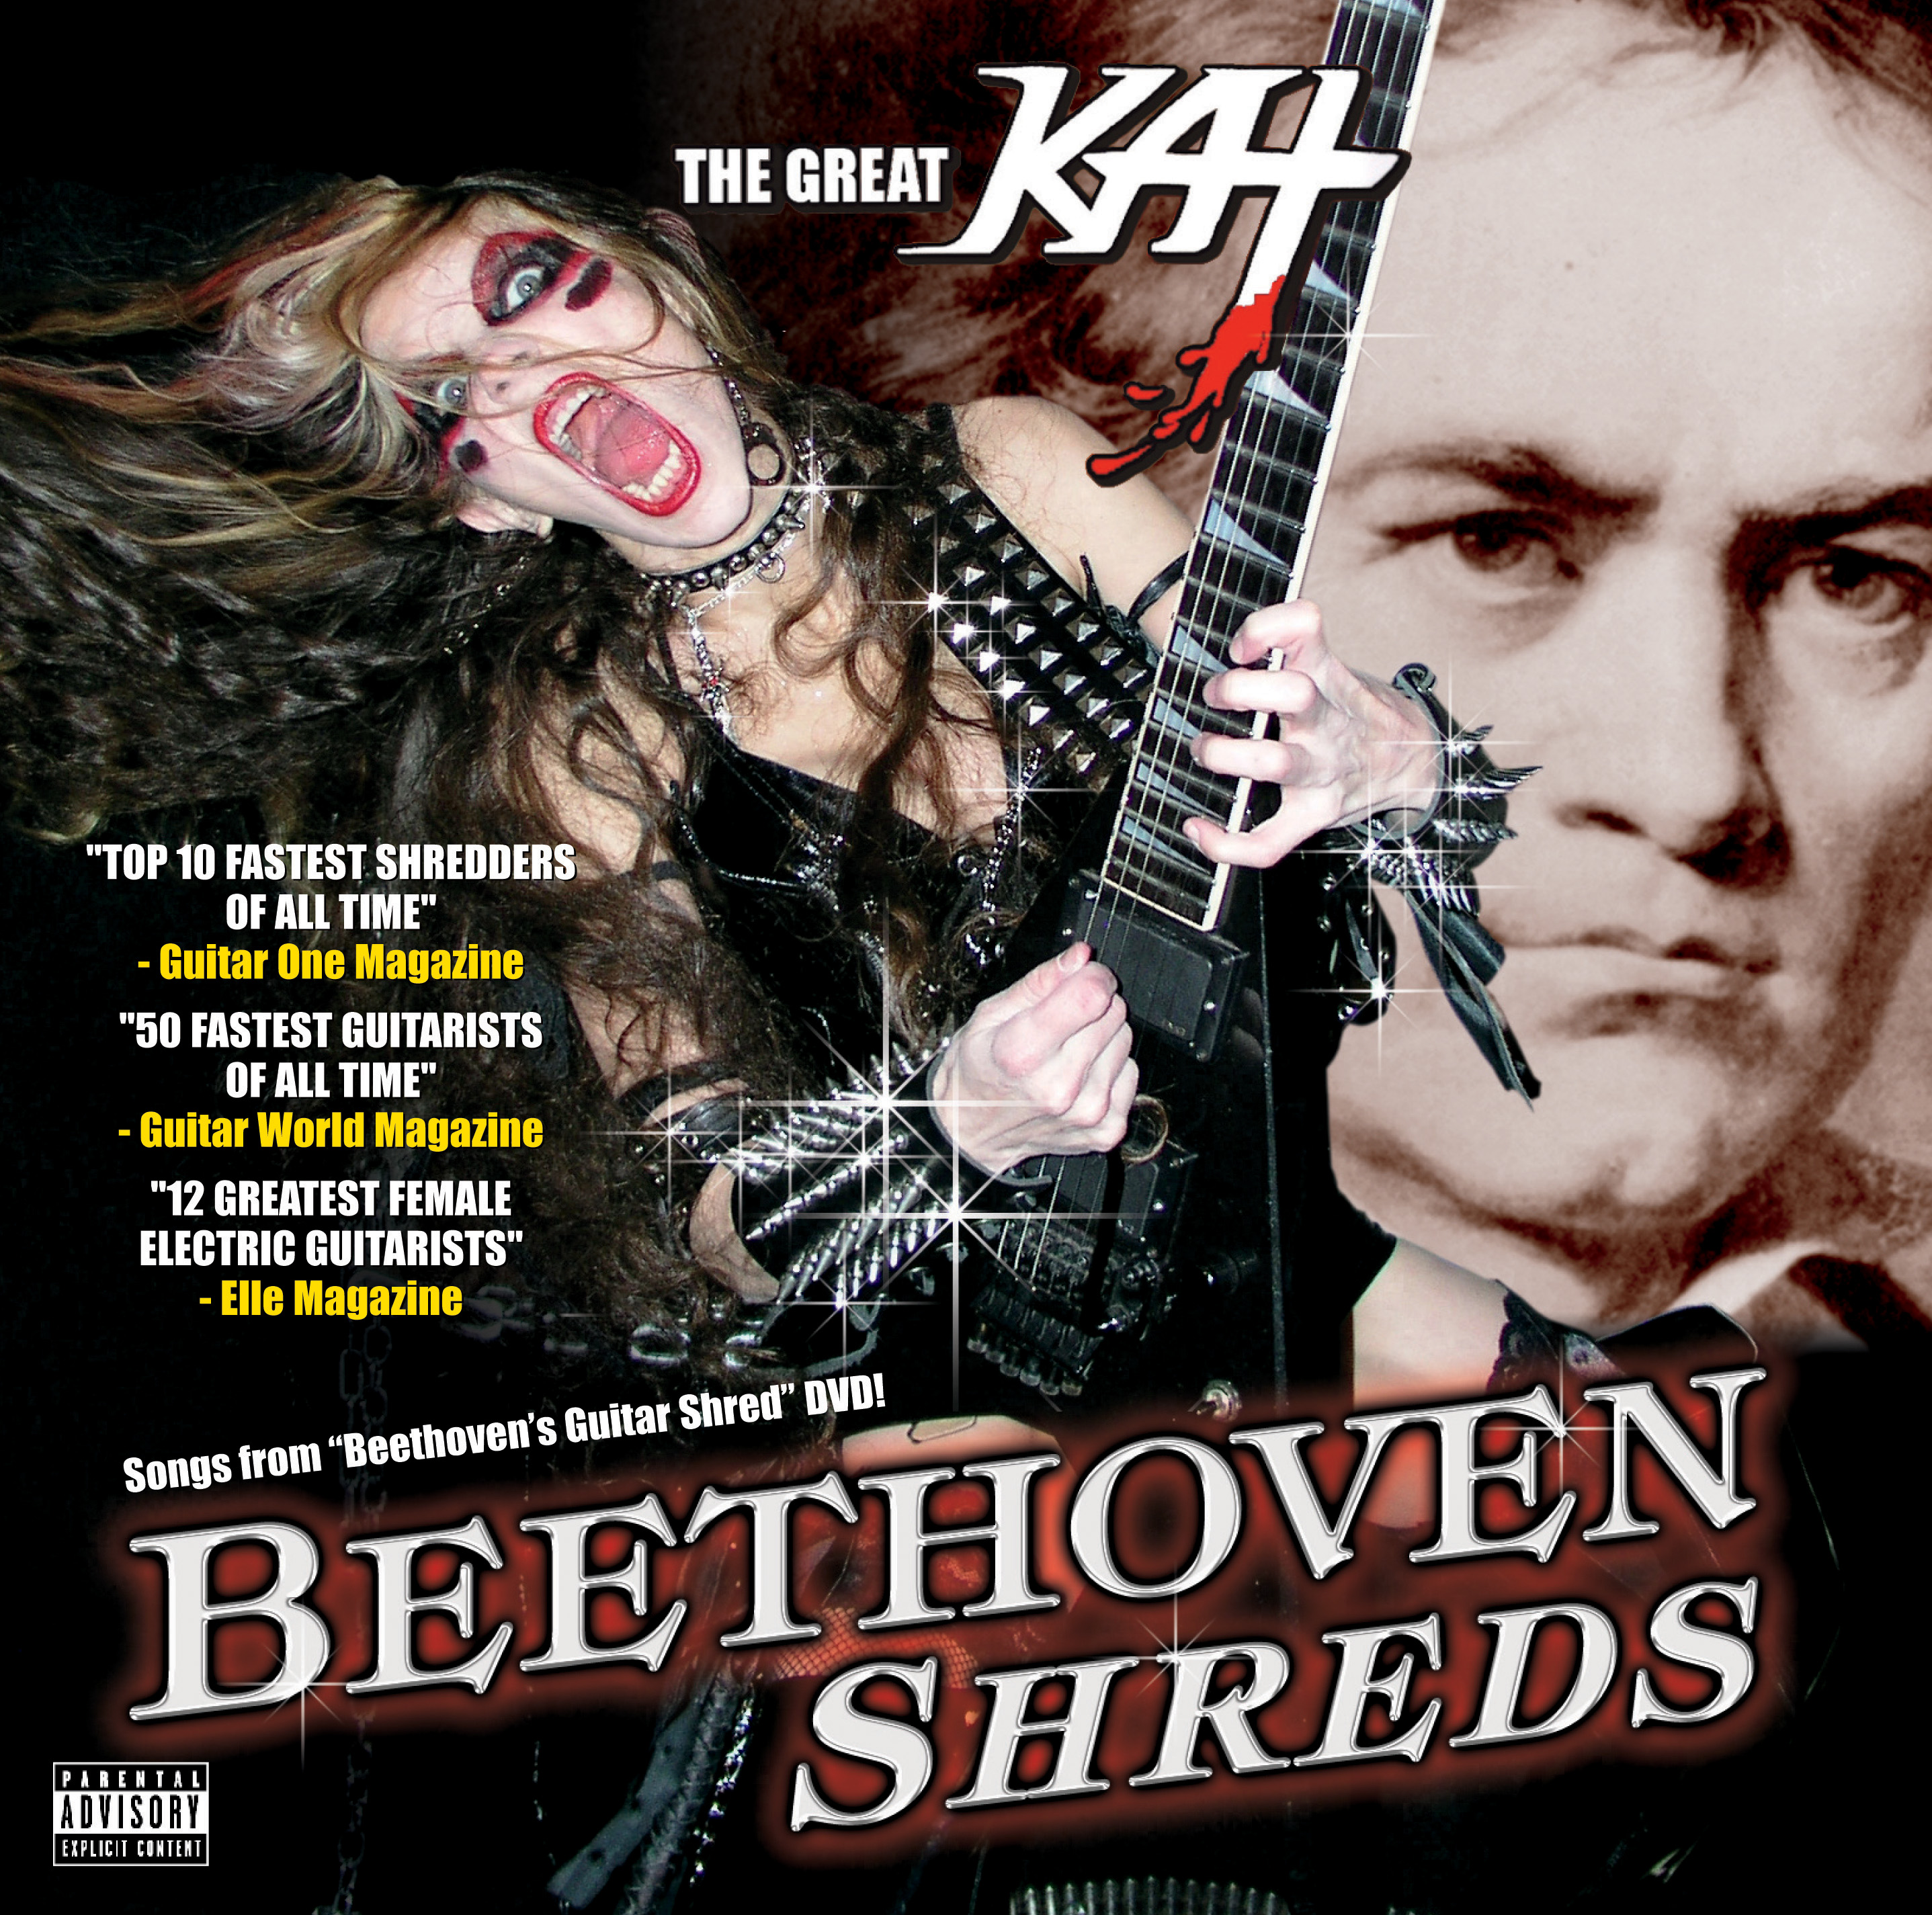 THE GREAT KAT "BEETHOVEN SHREDS" CD PHOTOS! 